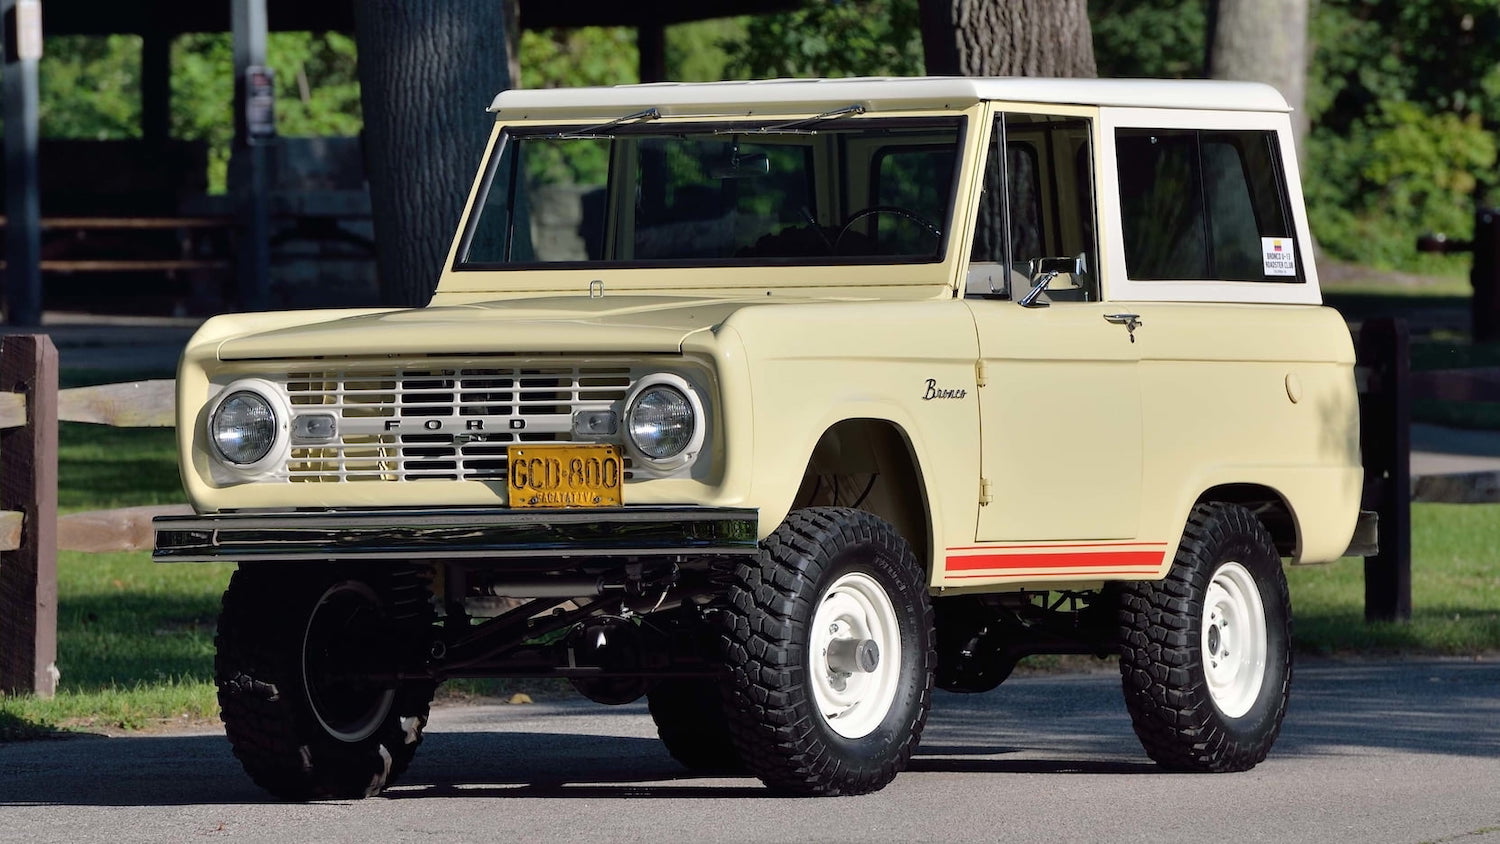 Extremely Rare 1967 Ford Bronco With Colorful History Up For Auction